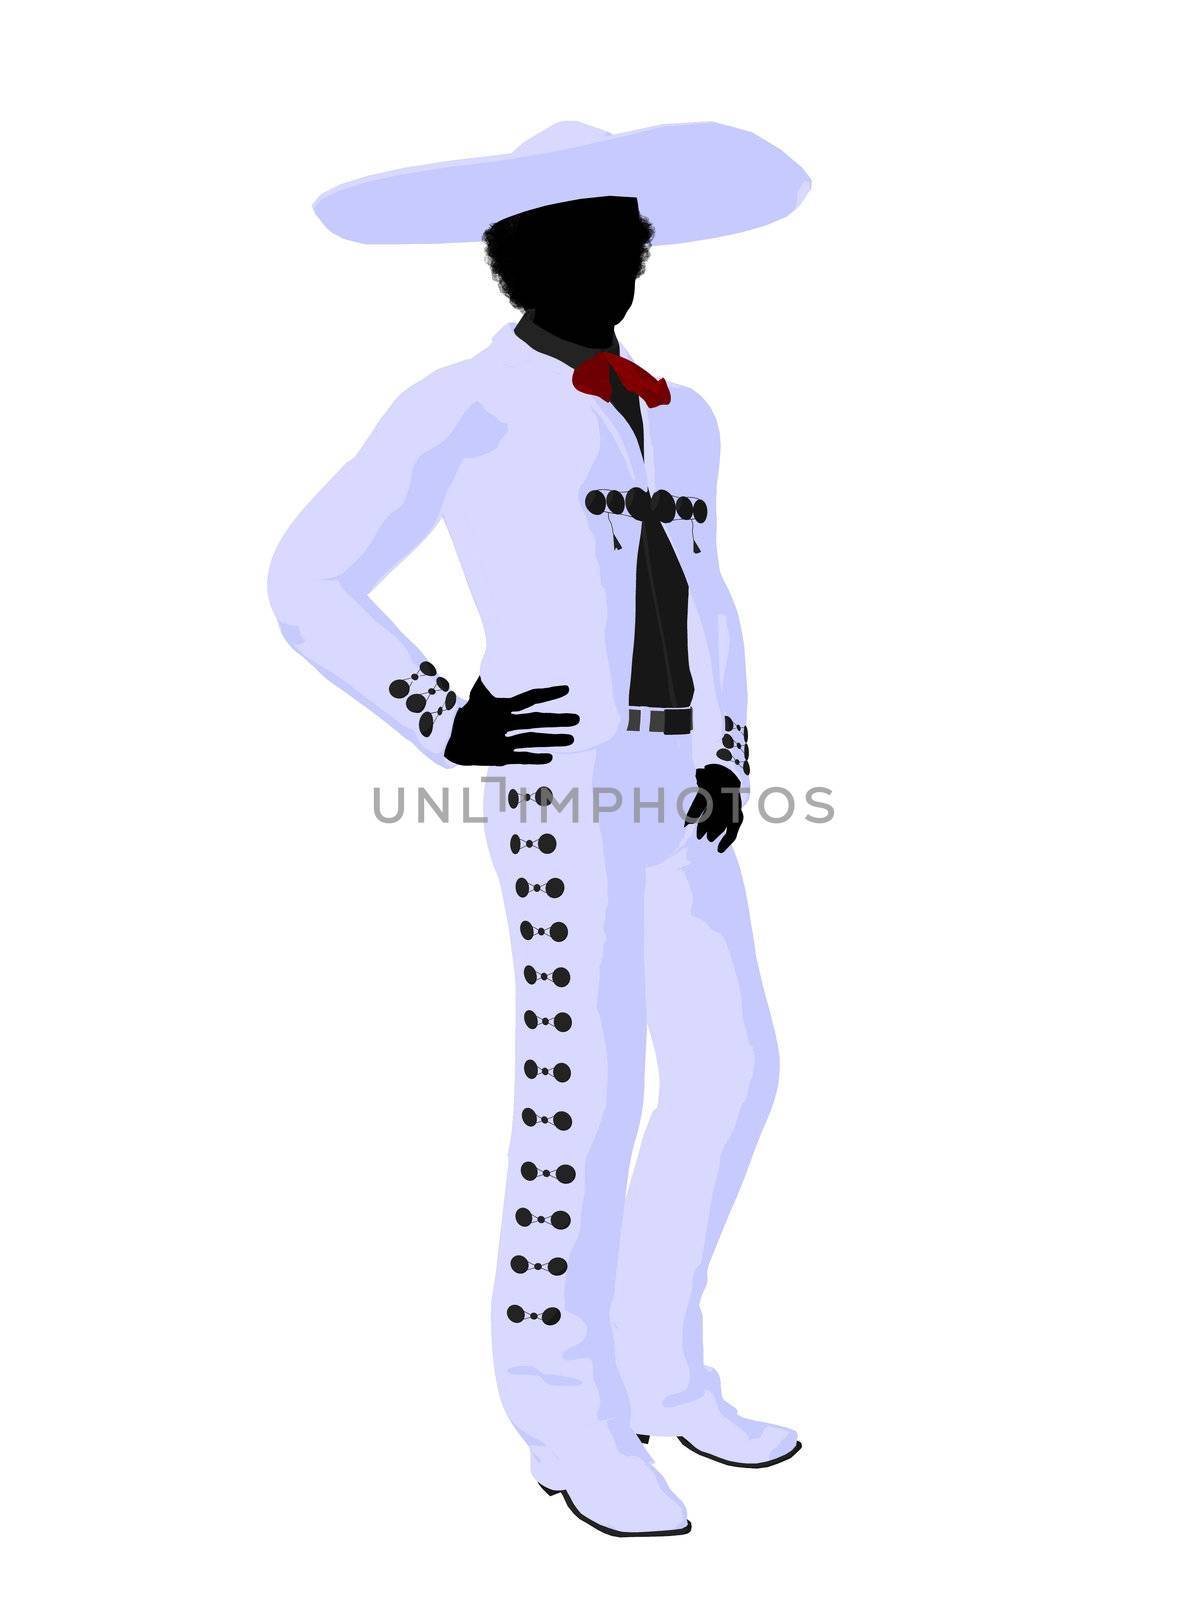 African American Mariachi Silhouette Illustration by kathygold